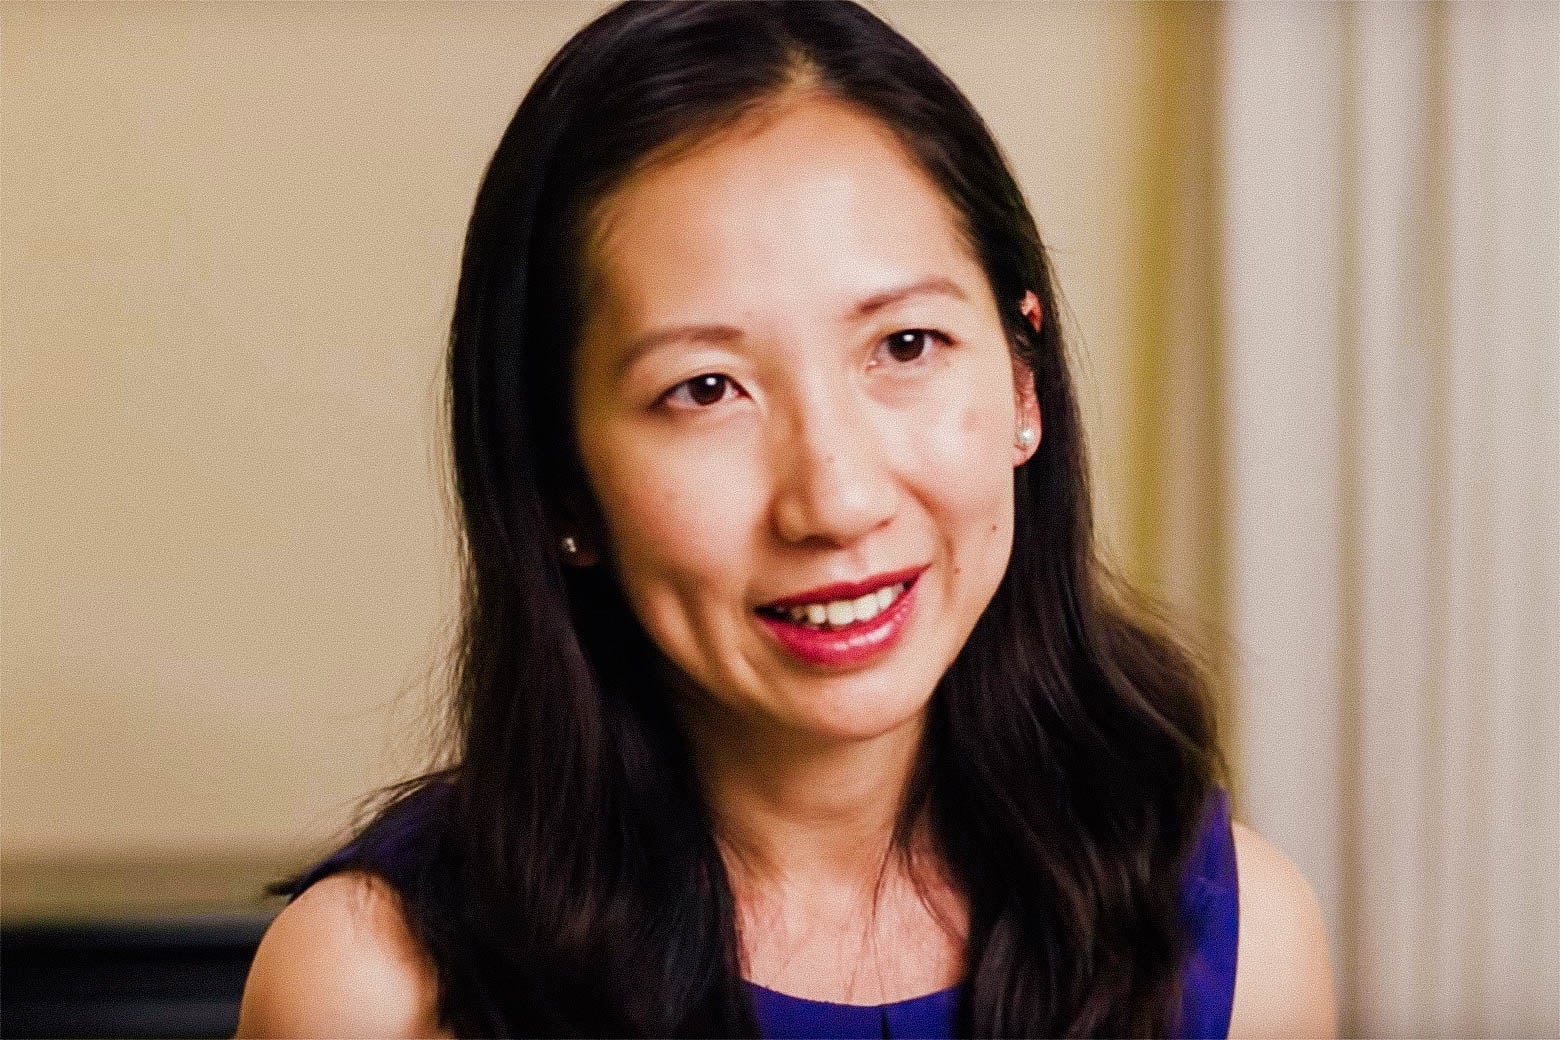 Leana Wen, Planned Parenthood’s next president, in a still from their video announcing her hiring.